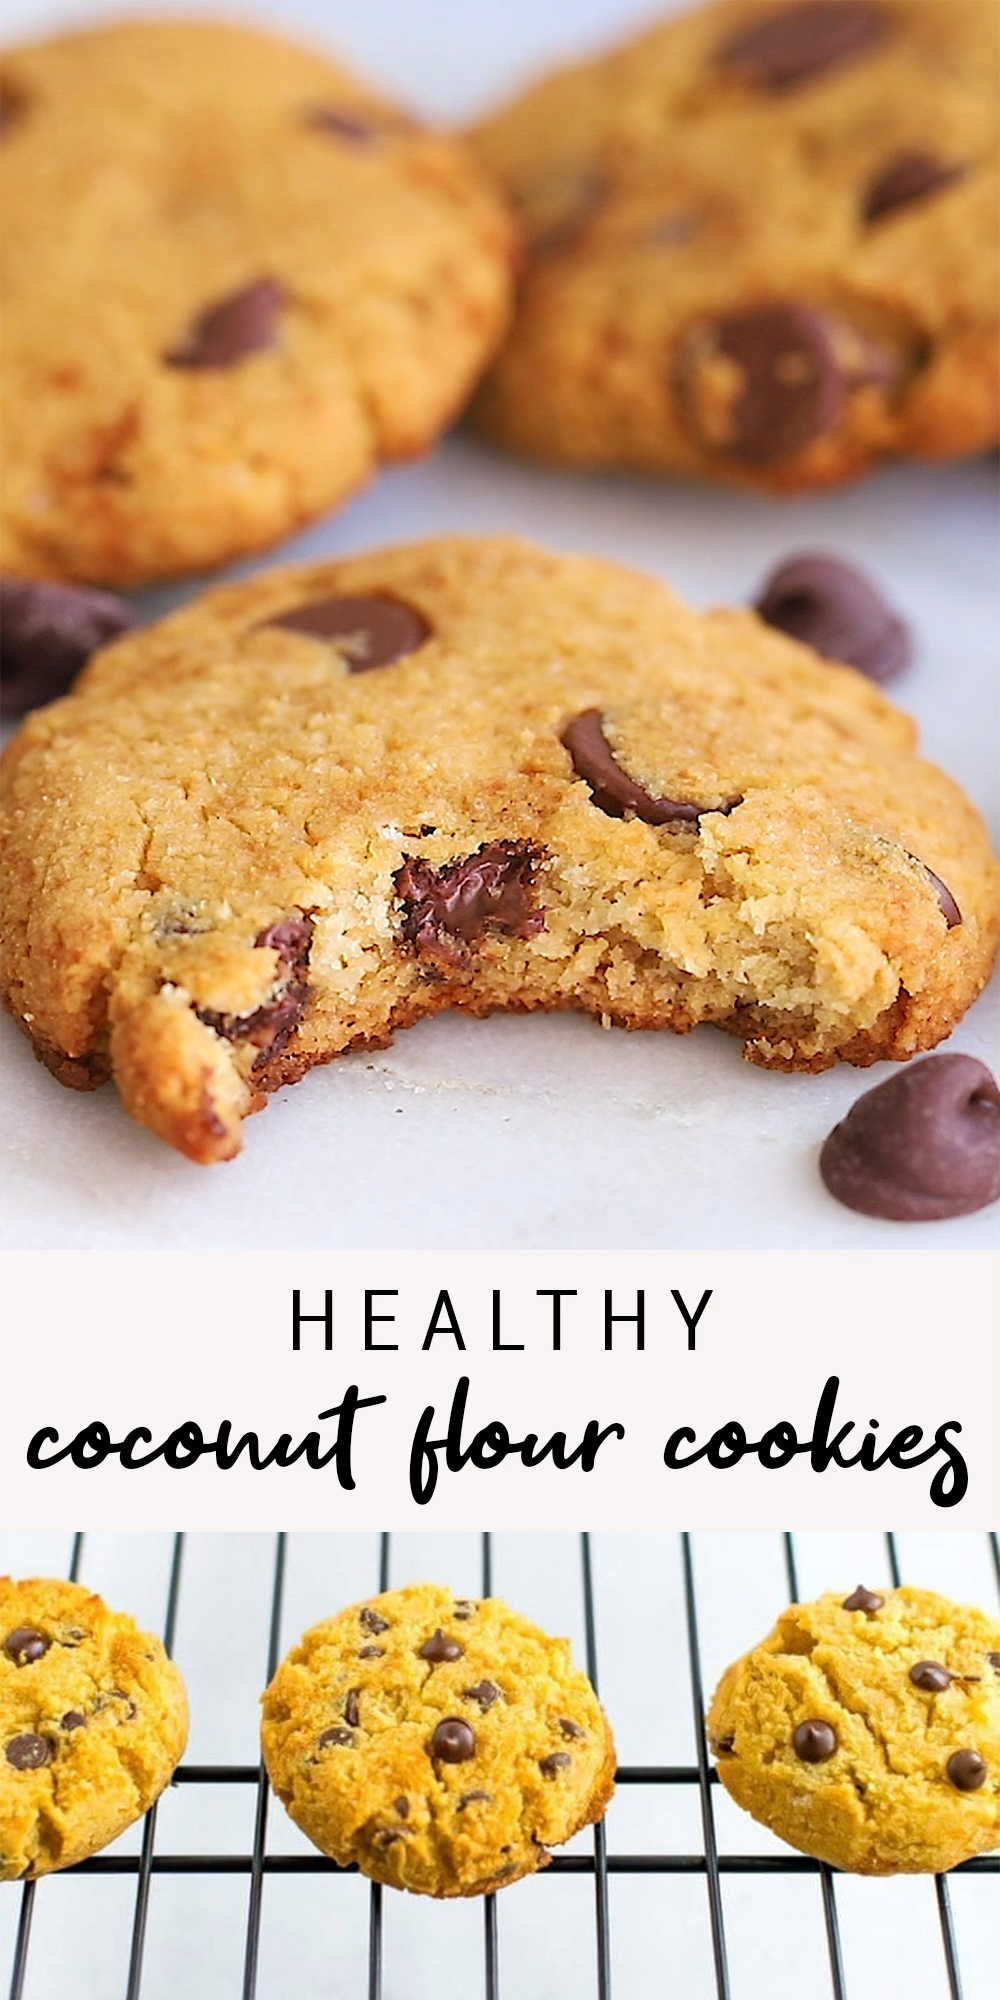 Easy Coconut Flour Cookies | Healthy Low Carb Recipe -   16 healthy recipes With Calories nutrition ideas